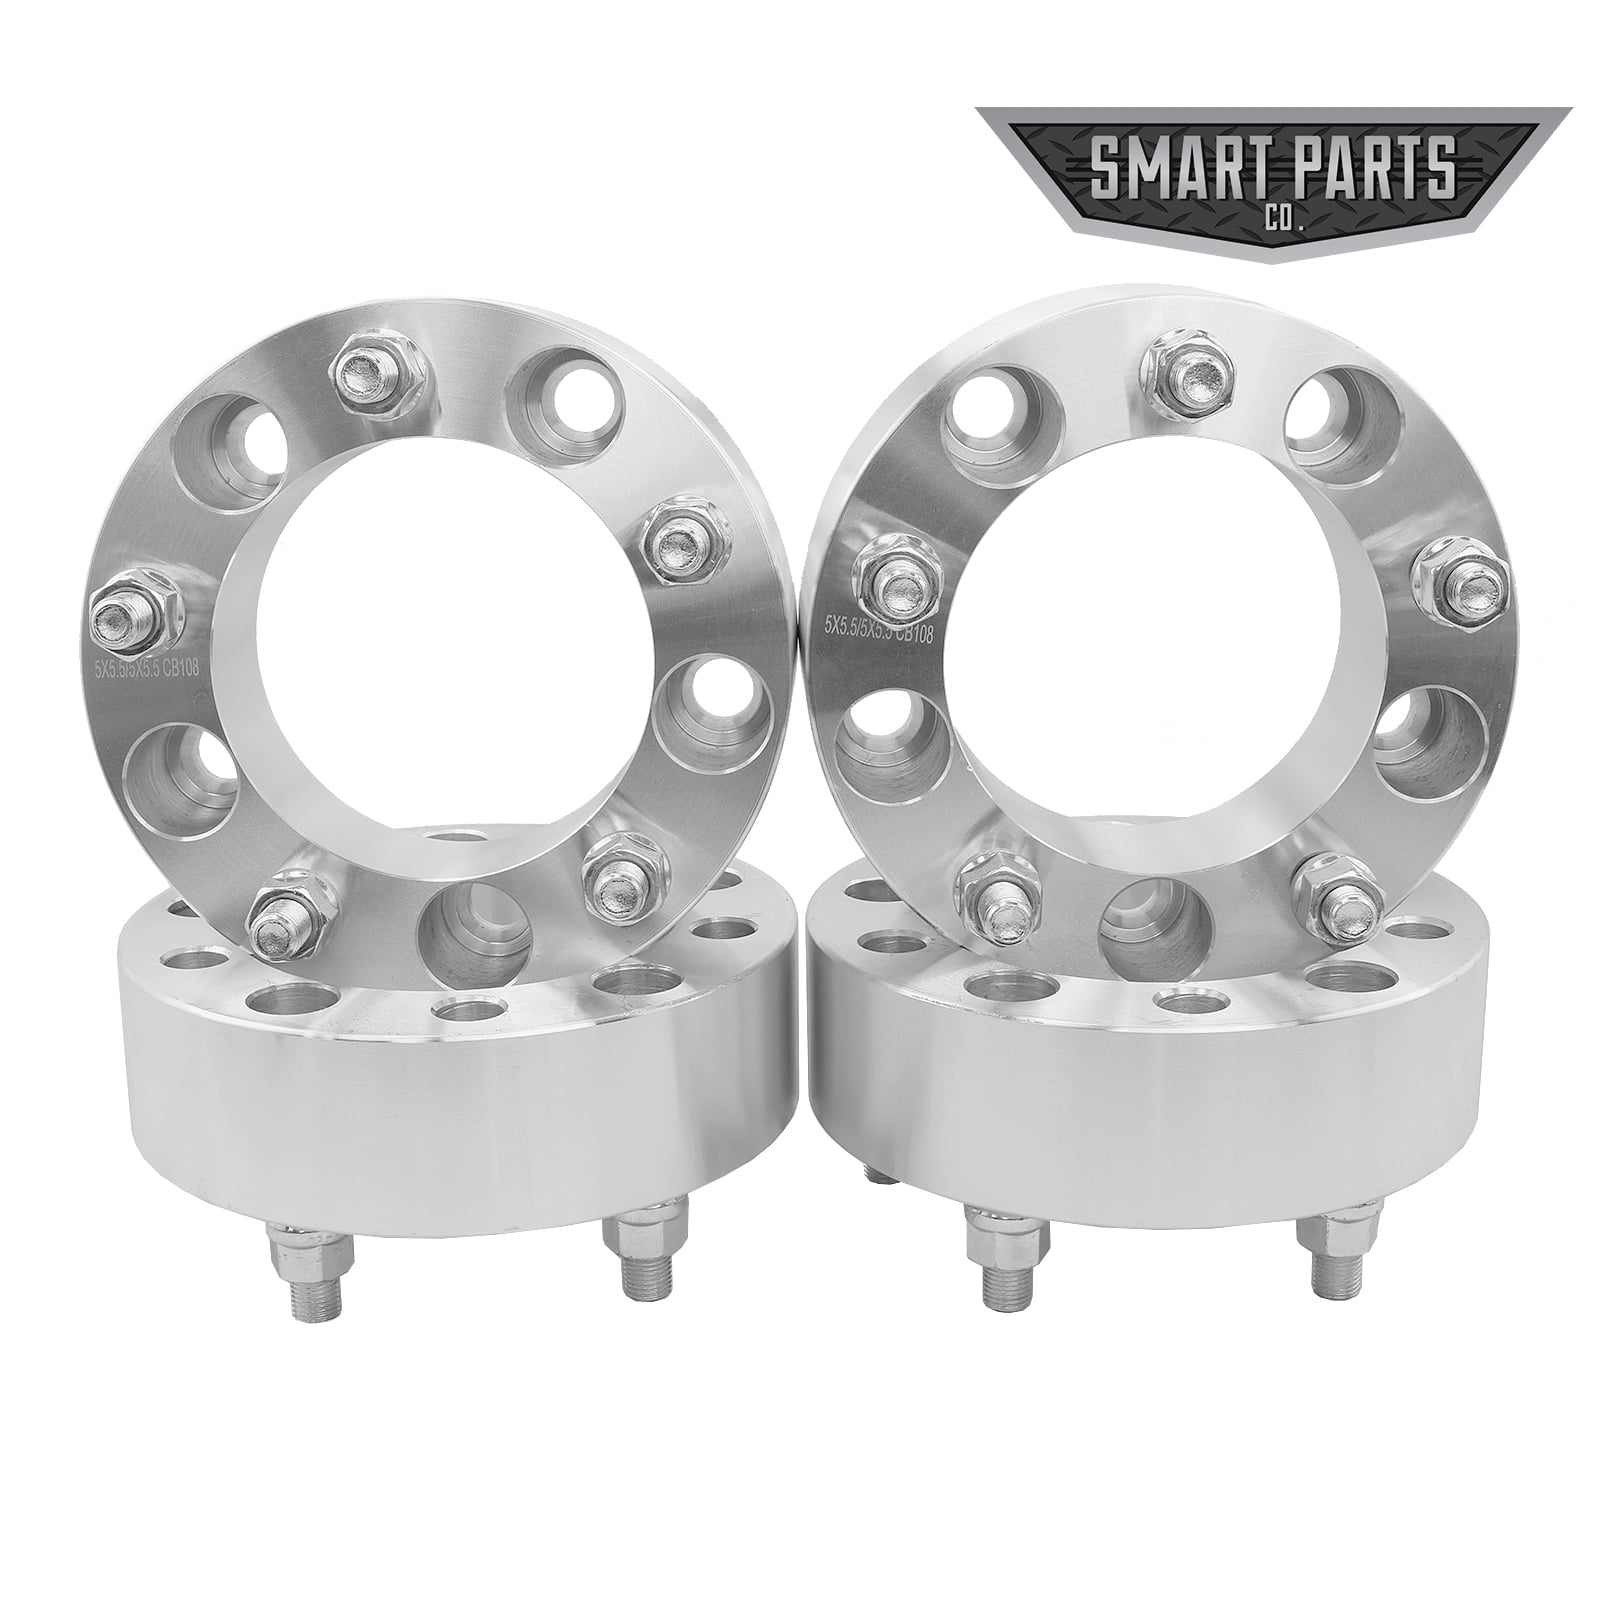 TUPARTS 2pack 5x5.5 1/2 108 1.25 Wheel Spacers adapters These Vehicles Listed Below Ford Bronco Dodge Ram 1500 Van Jeep CJ6 